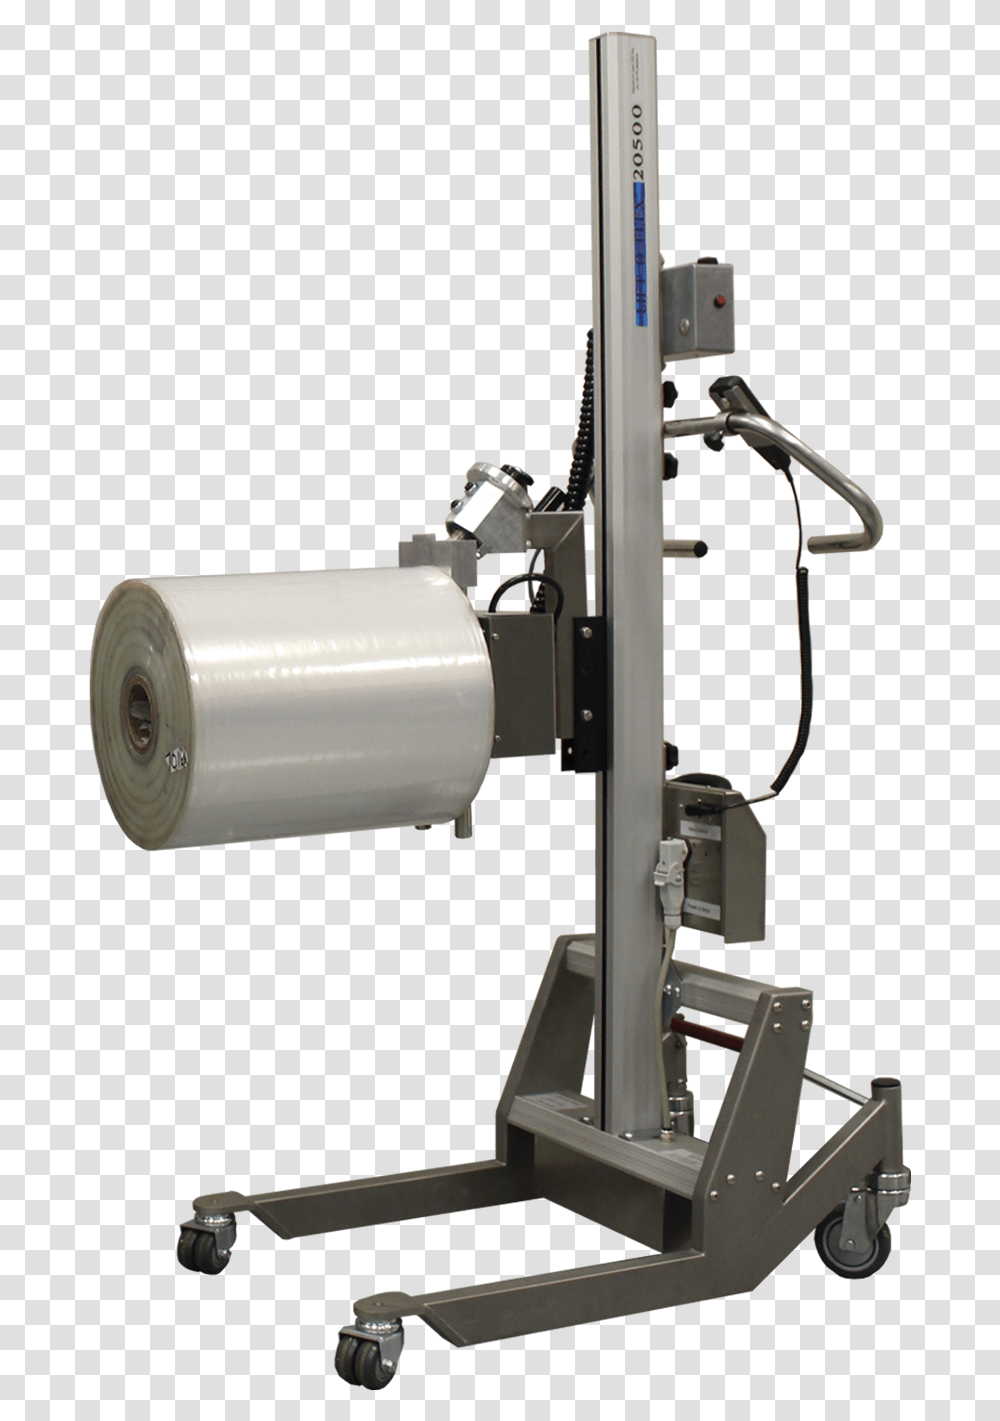 Series With Expand O Turn Core Grip To Manipulate Film Roll Handling Equipment, Machine, Camera, Electronics, Video Camera Transparent Png